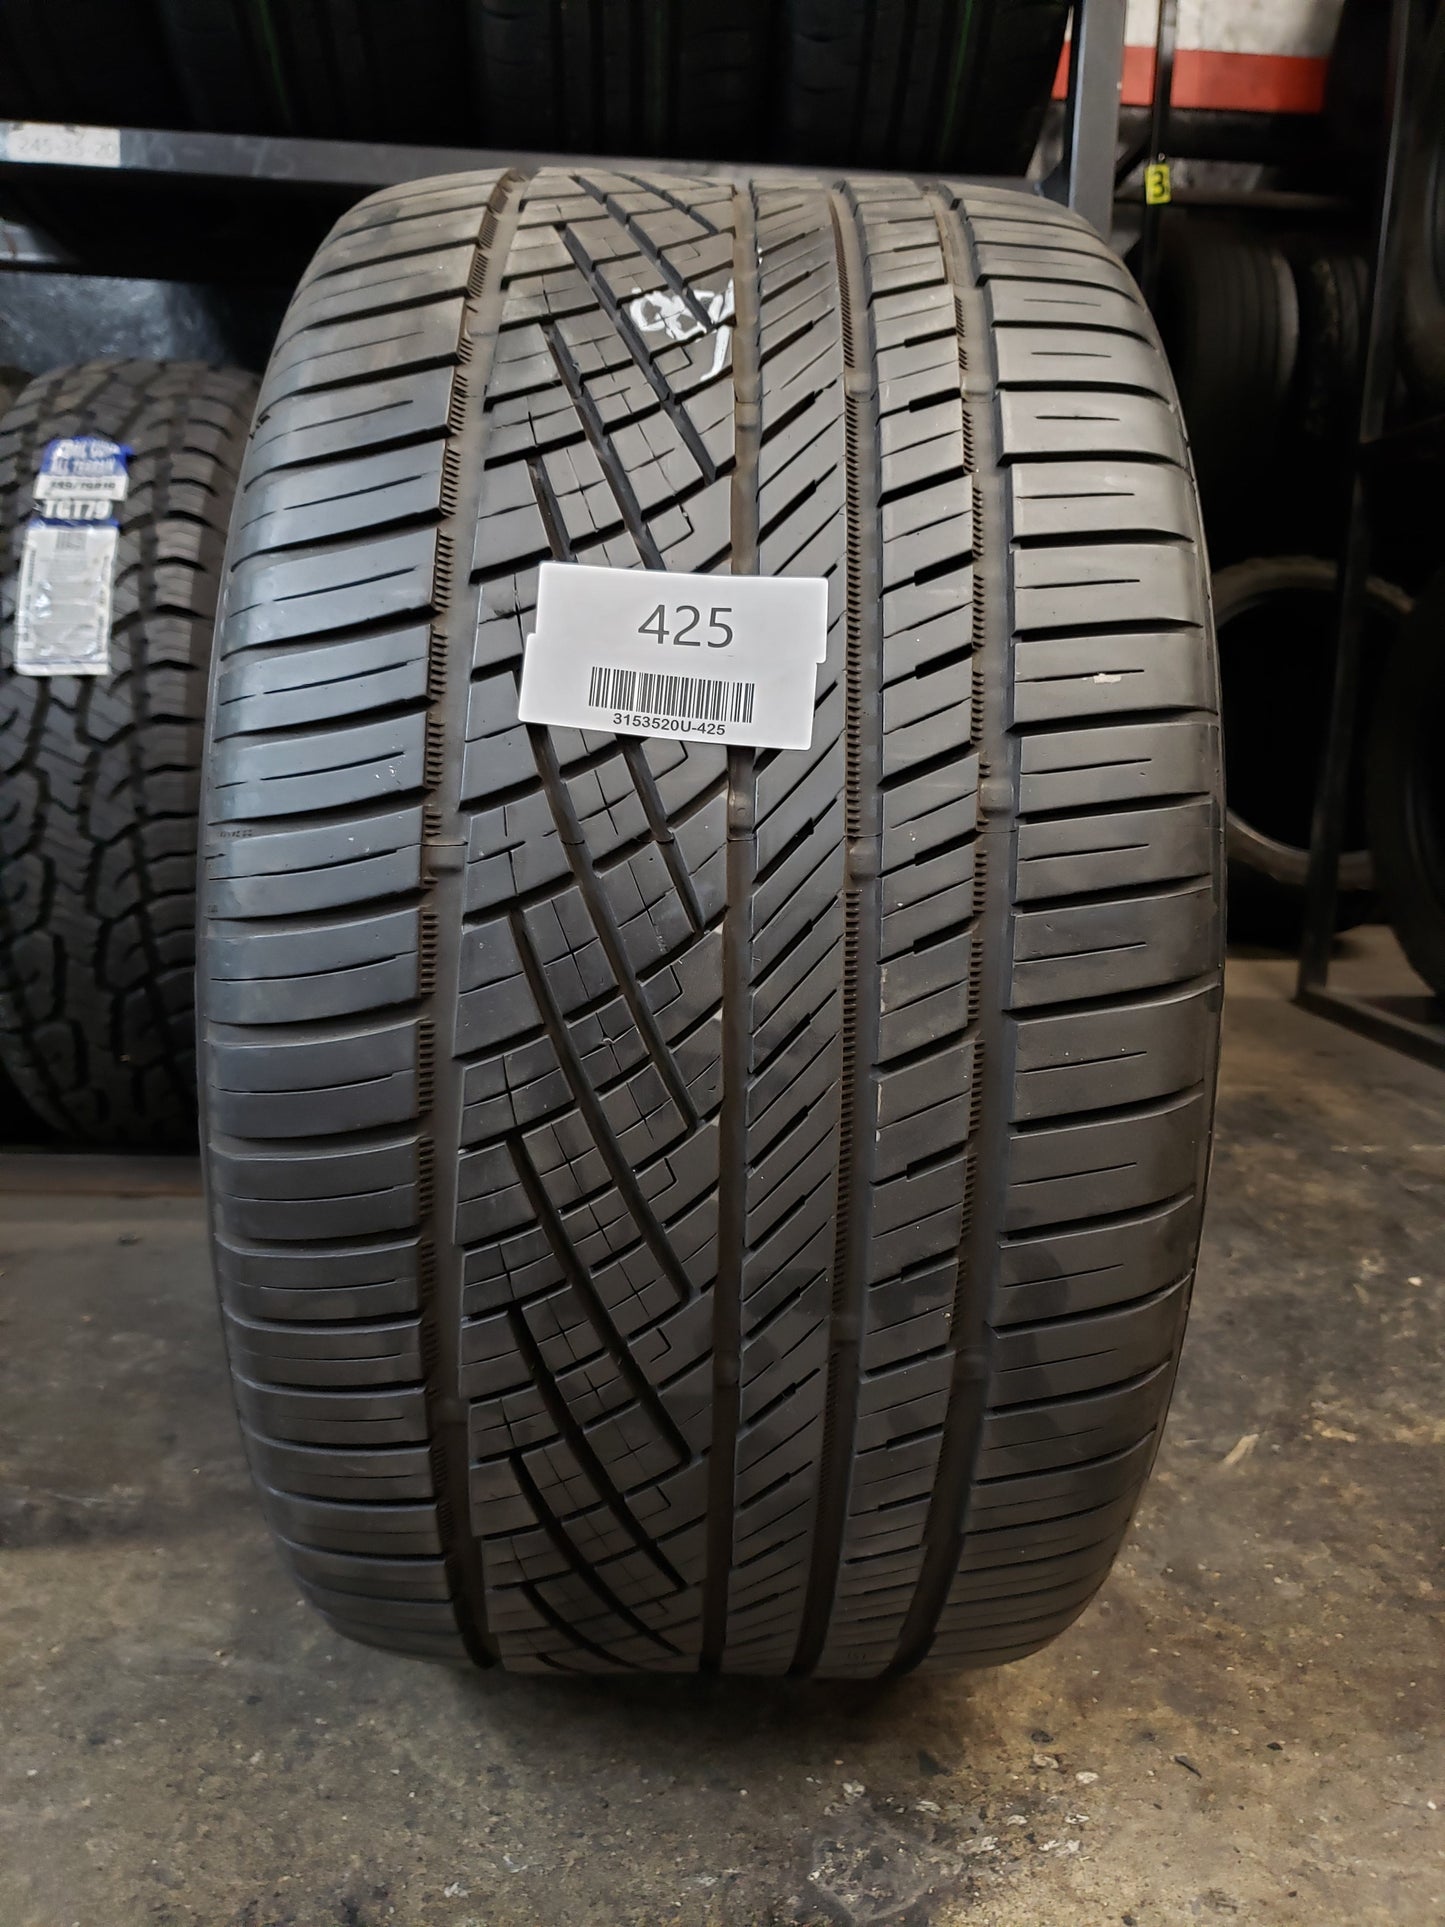 SINGLE 315/35R20 Continental Extreme Contact DWS 06 110 Y XL - Used Tires